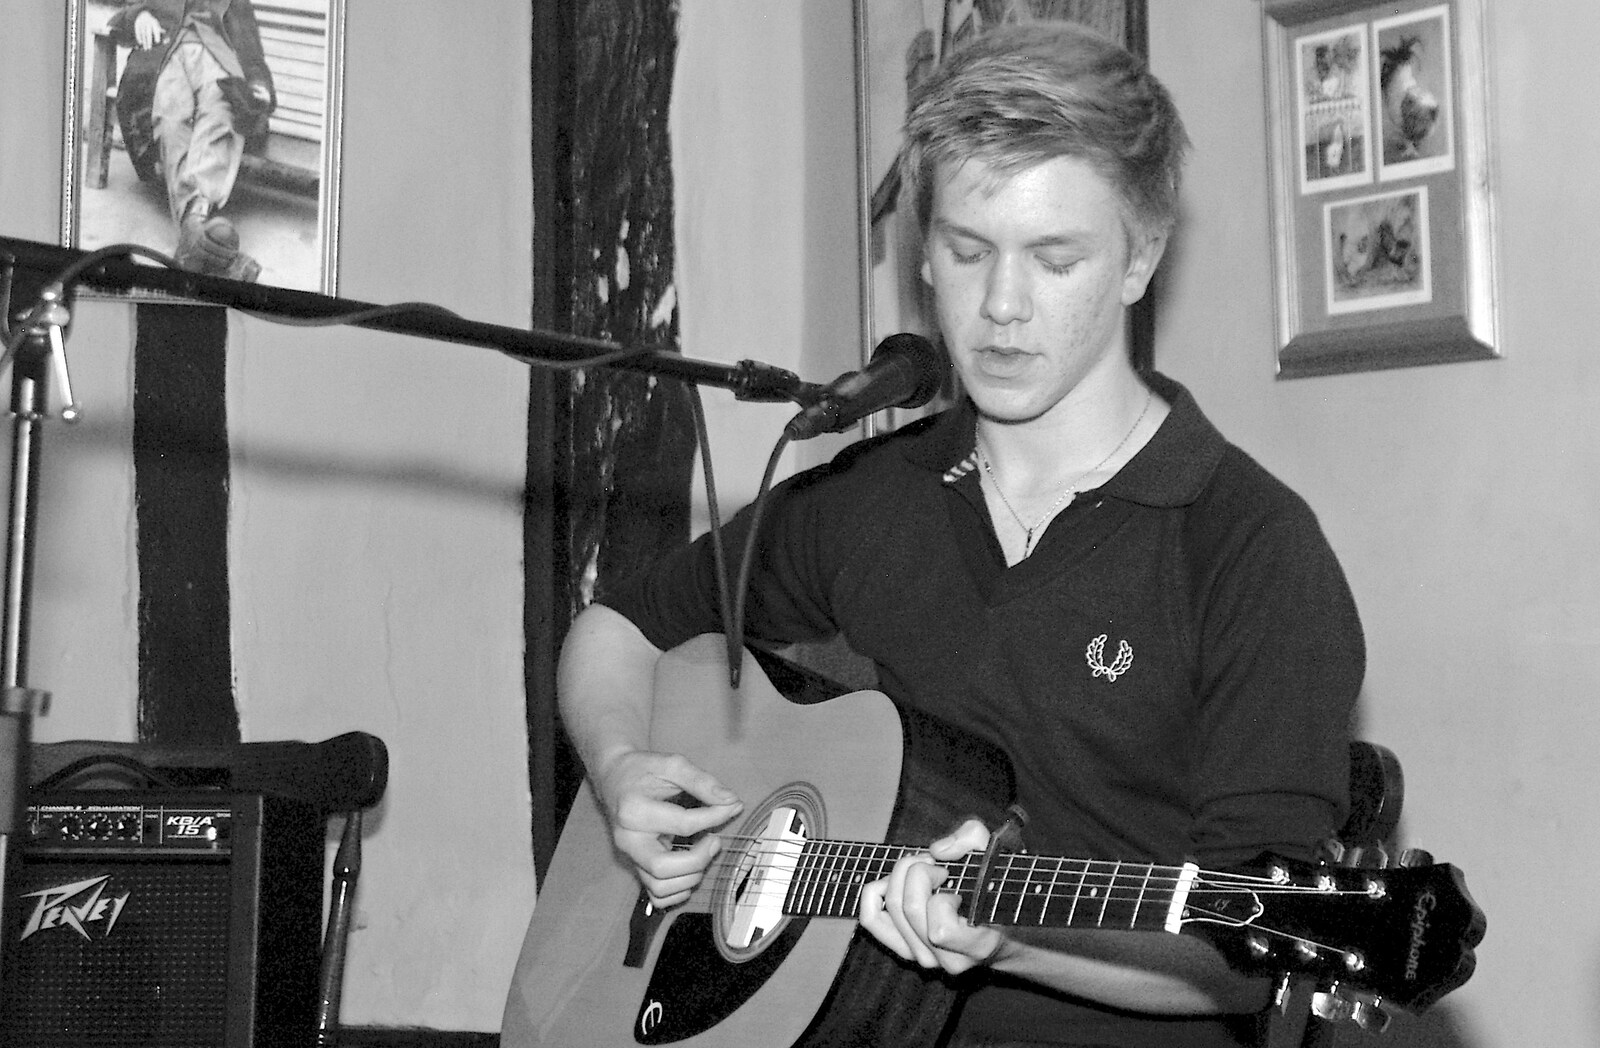 Rory plays guitar from Rory Hill's "Tour in a Night", Norfolk and Suffolk - 17th November 2006